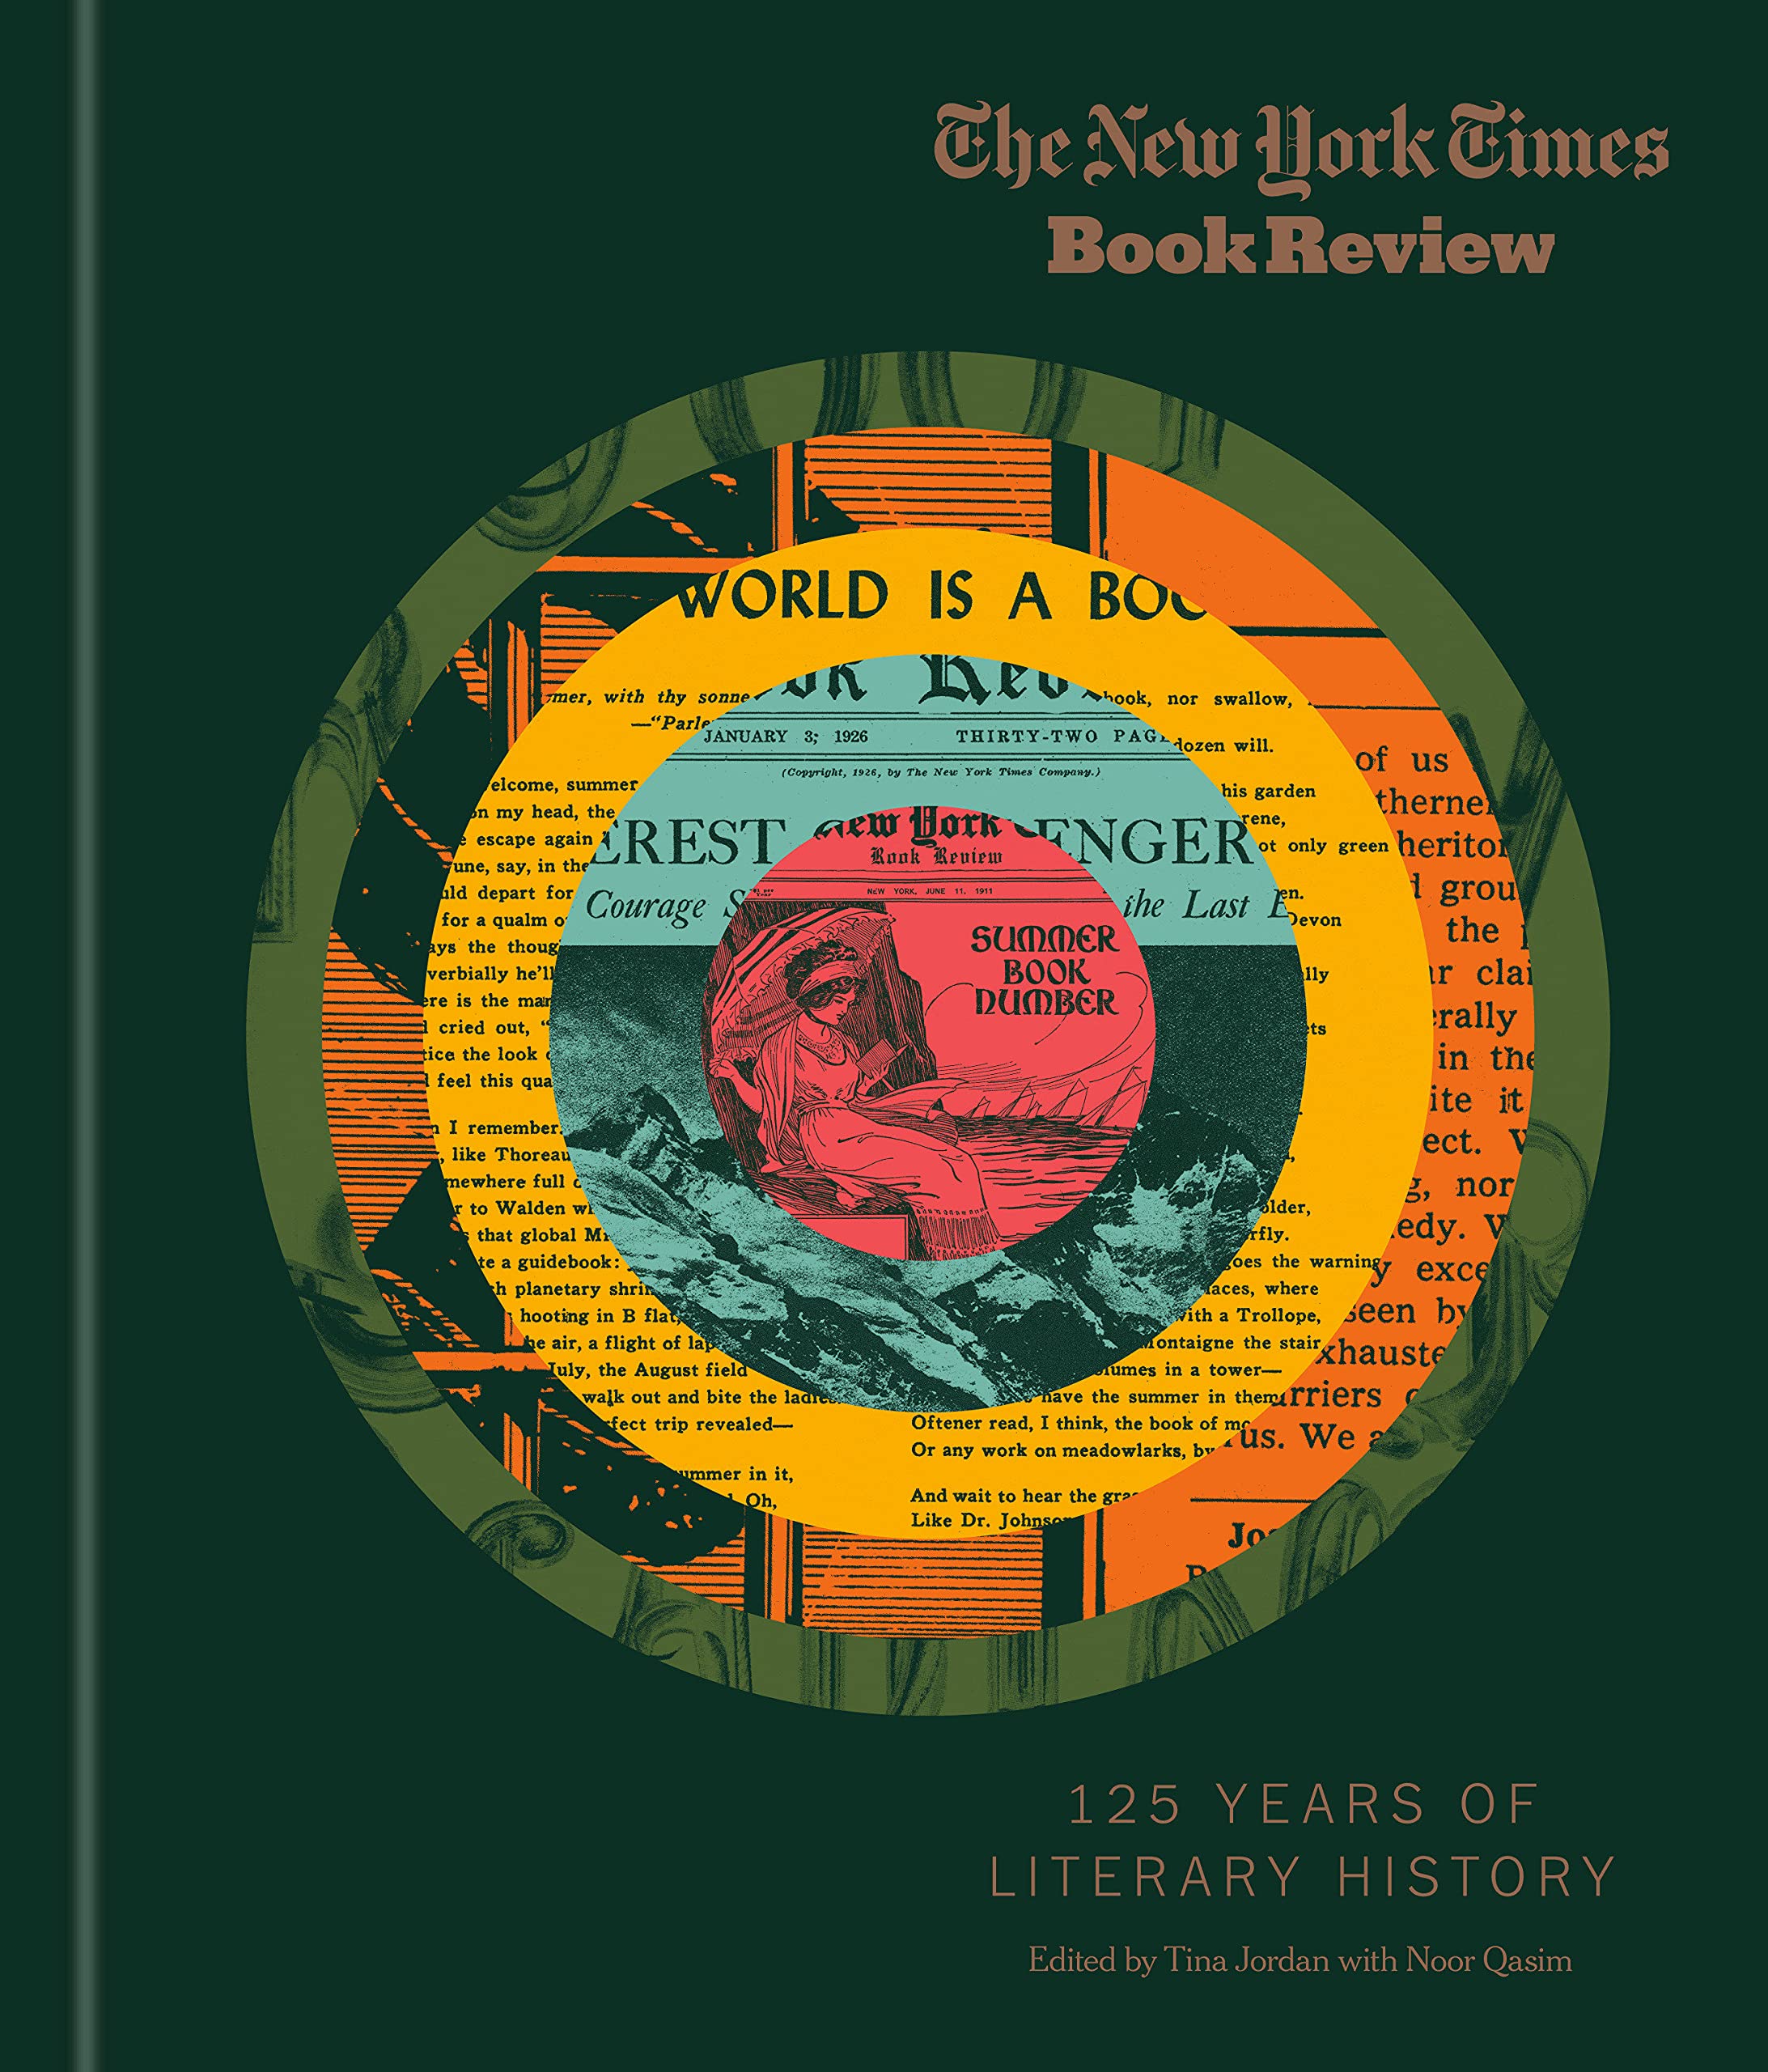 ny times book review 125 years